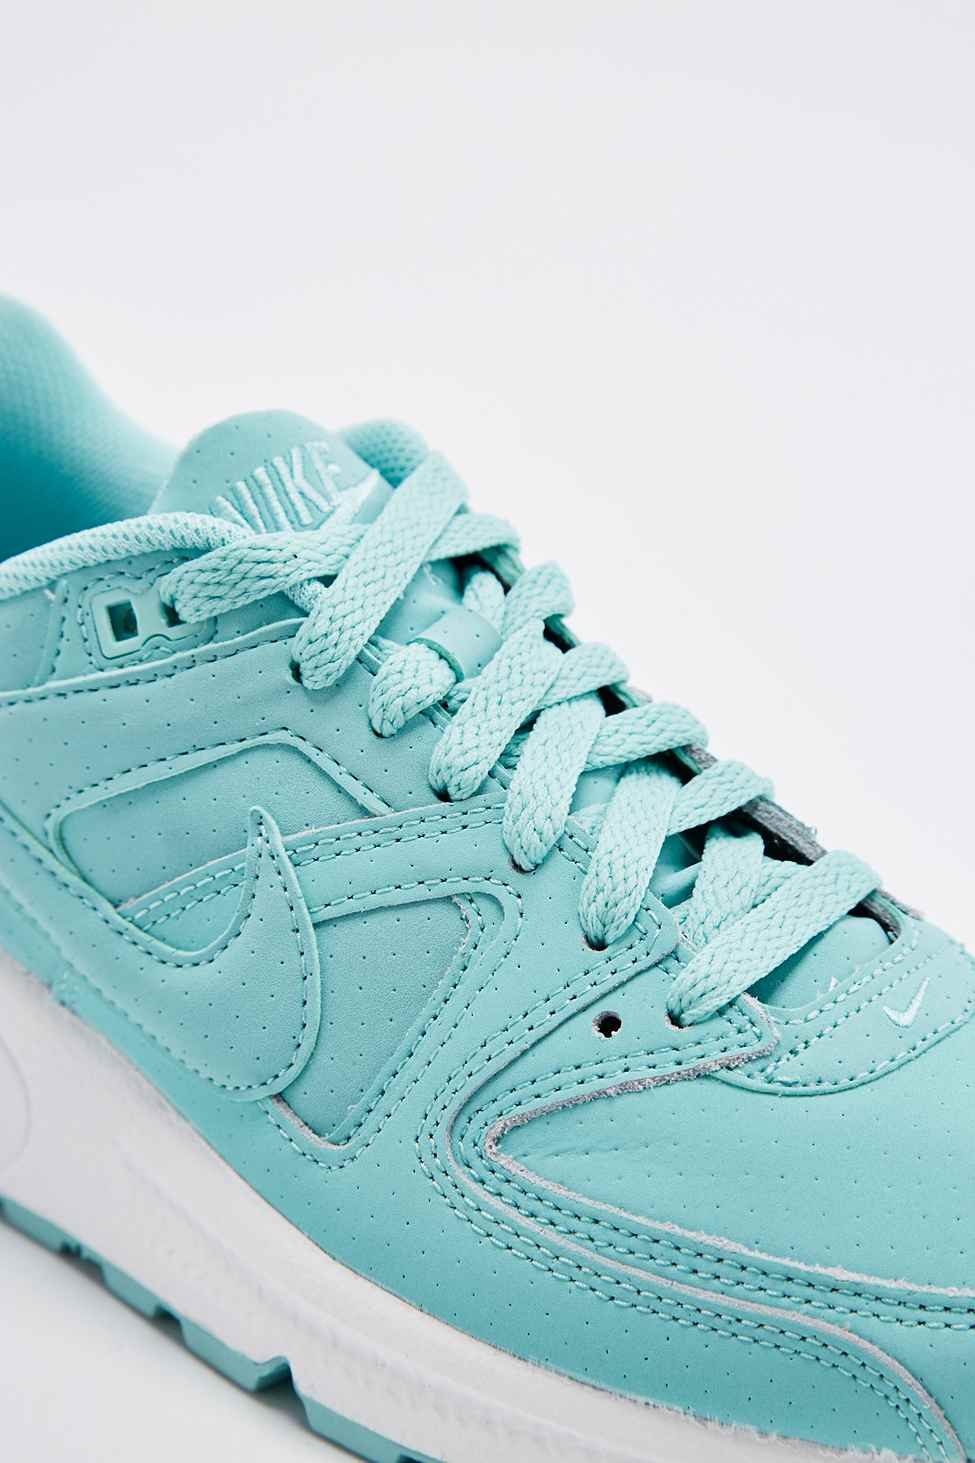 Nike Air Max Command Premium Trainers In Mint Green | Lyst UK